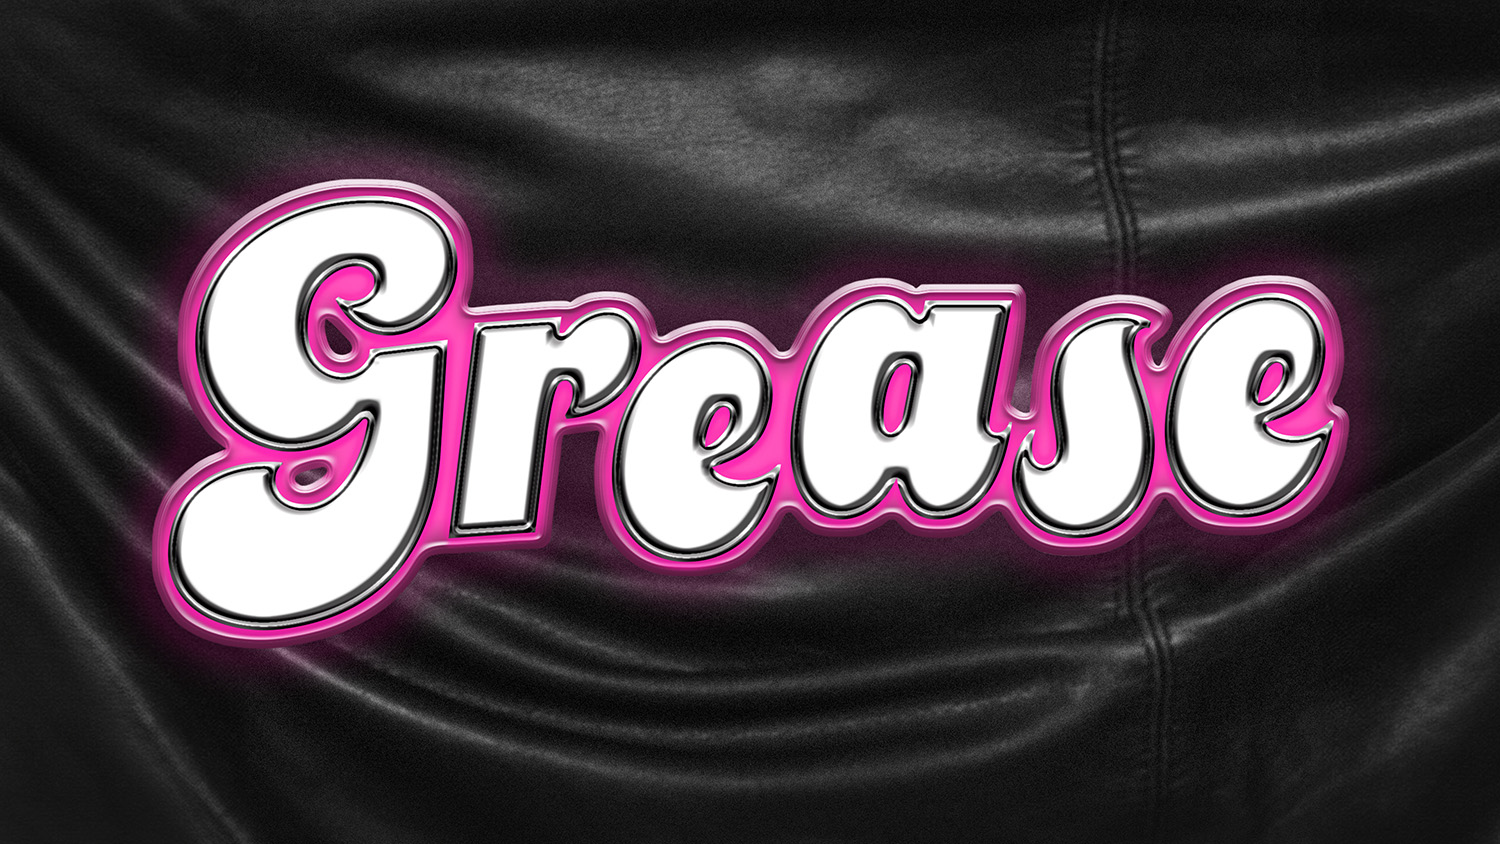 Logo for Grease. A close-up photo of a leather jacket's back with the word Grease in chrome in front.